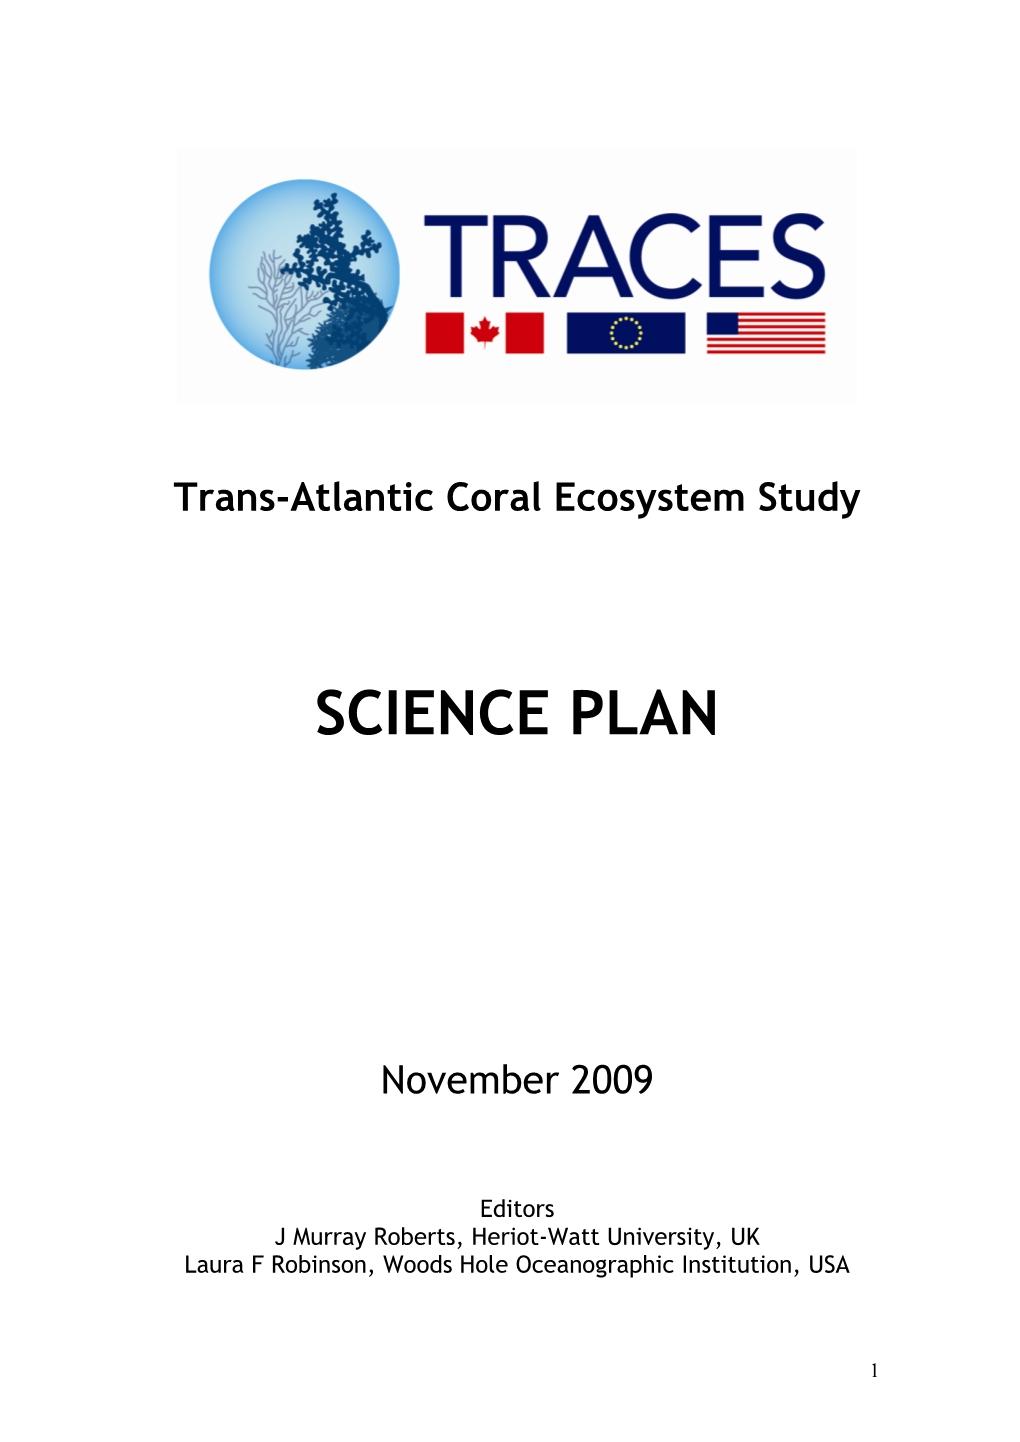 TRACES Science Plan Structure